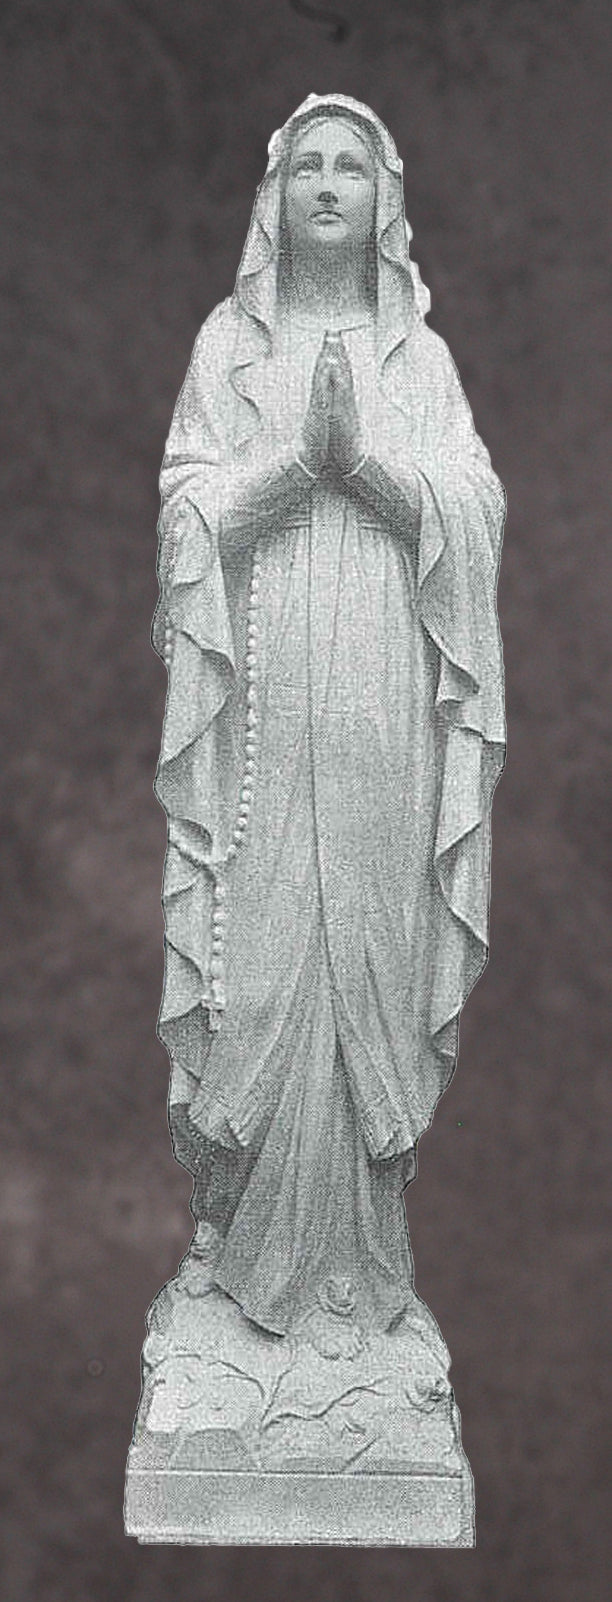 Our Lady of Lourdes Marble Statue Style 2 - 48”H